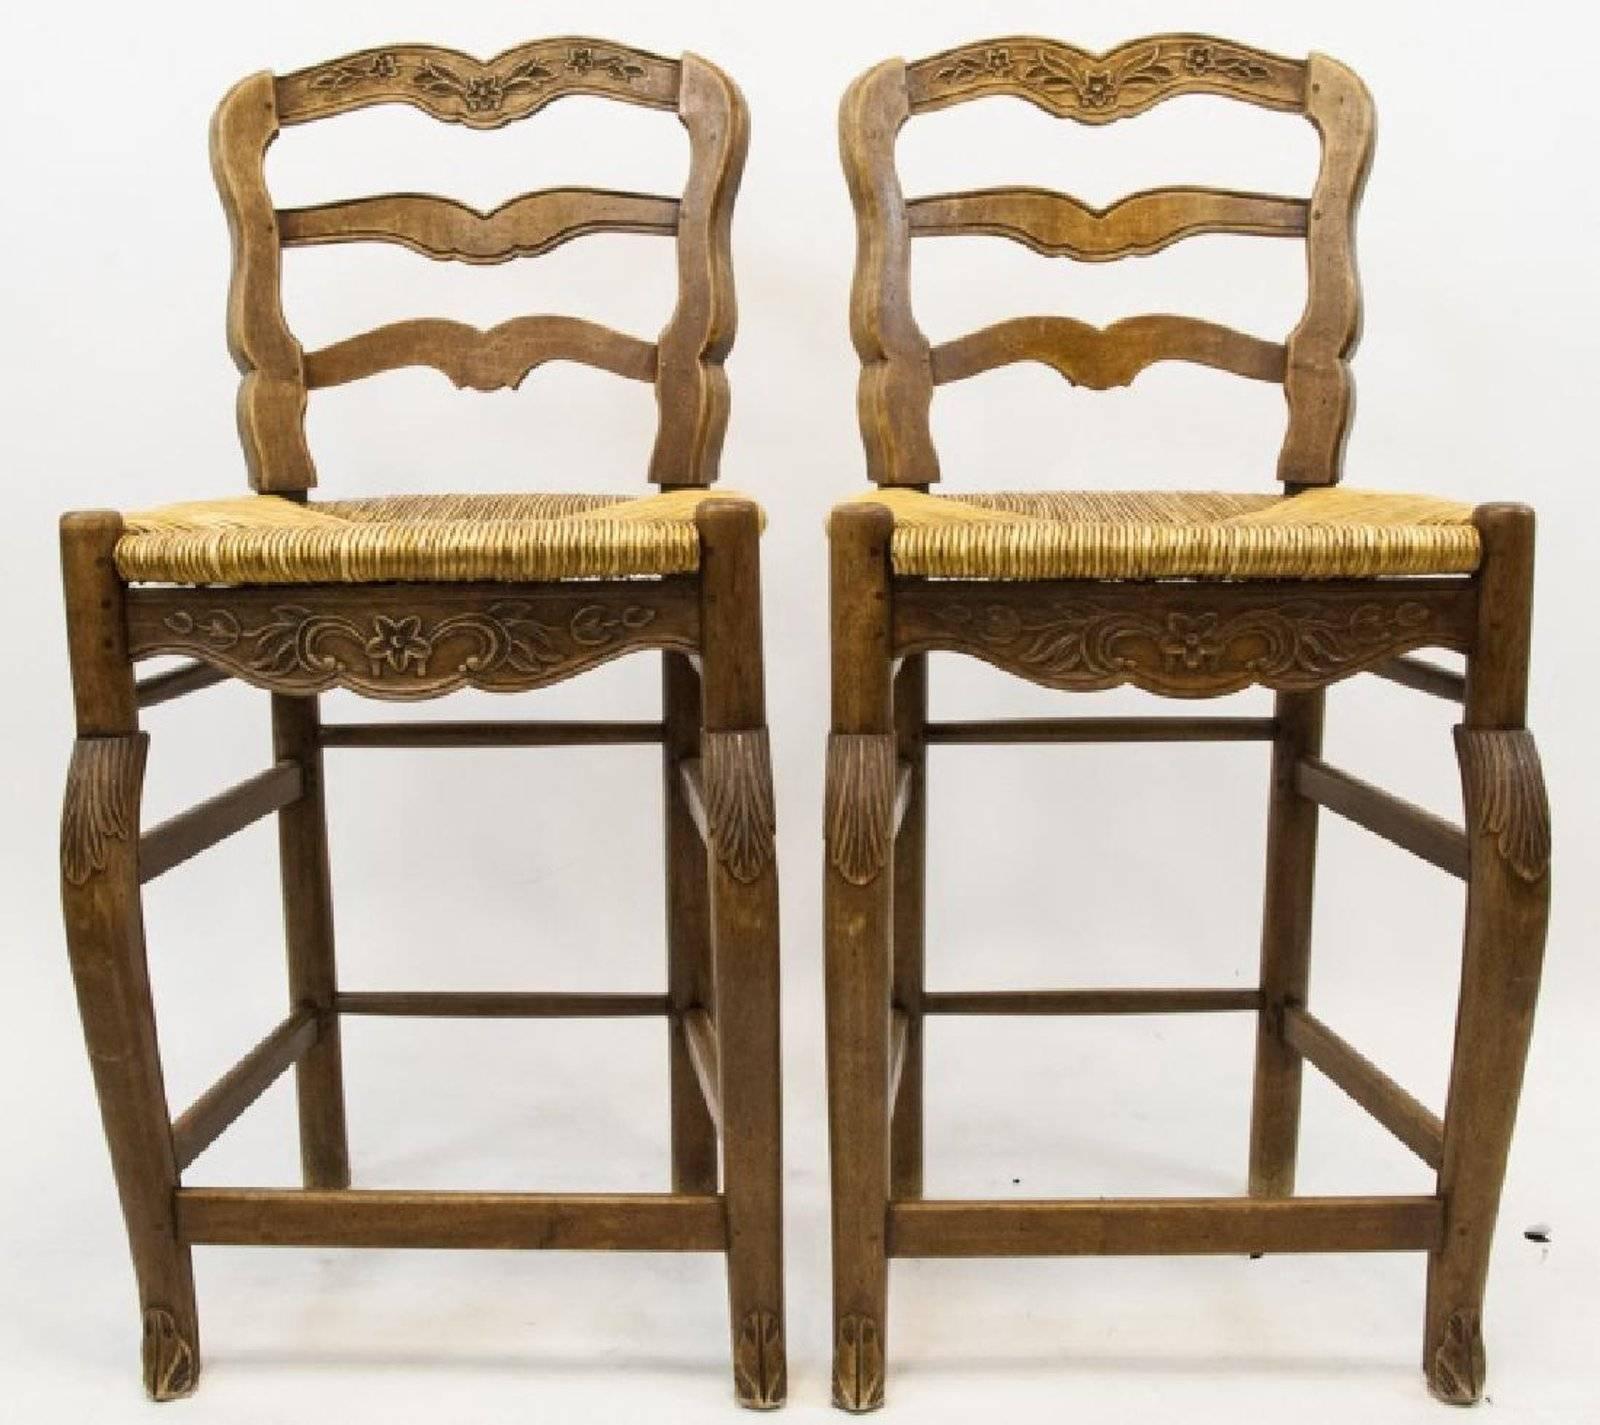 French Country Ladder Back Bar Stools, Ladder Back Counter Stools With Rush Seats